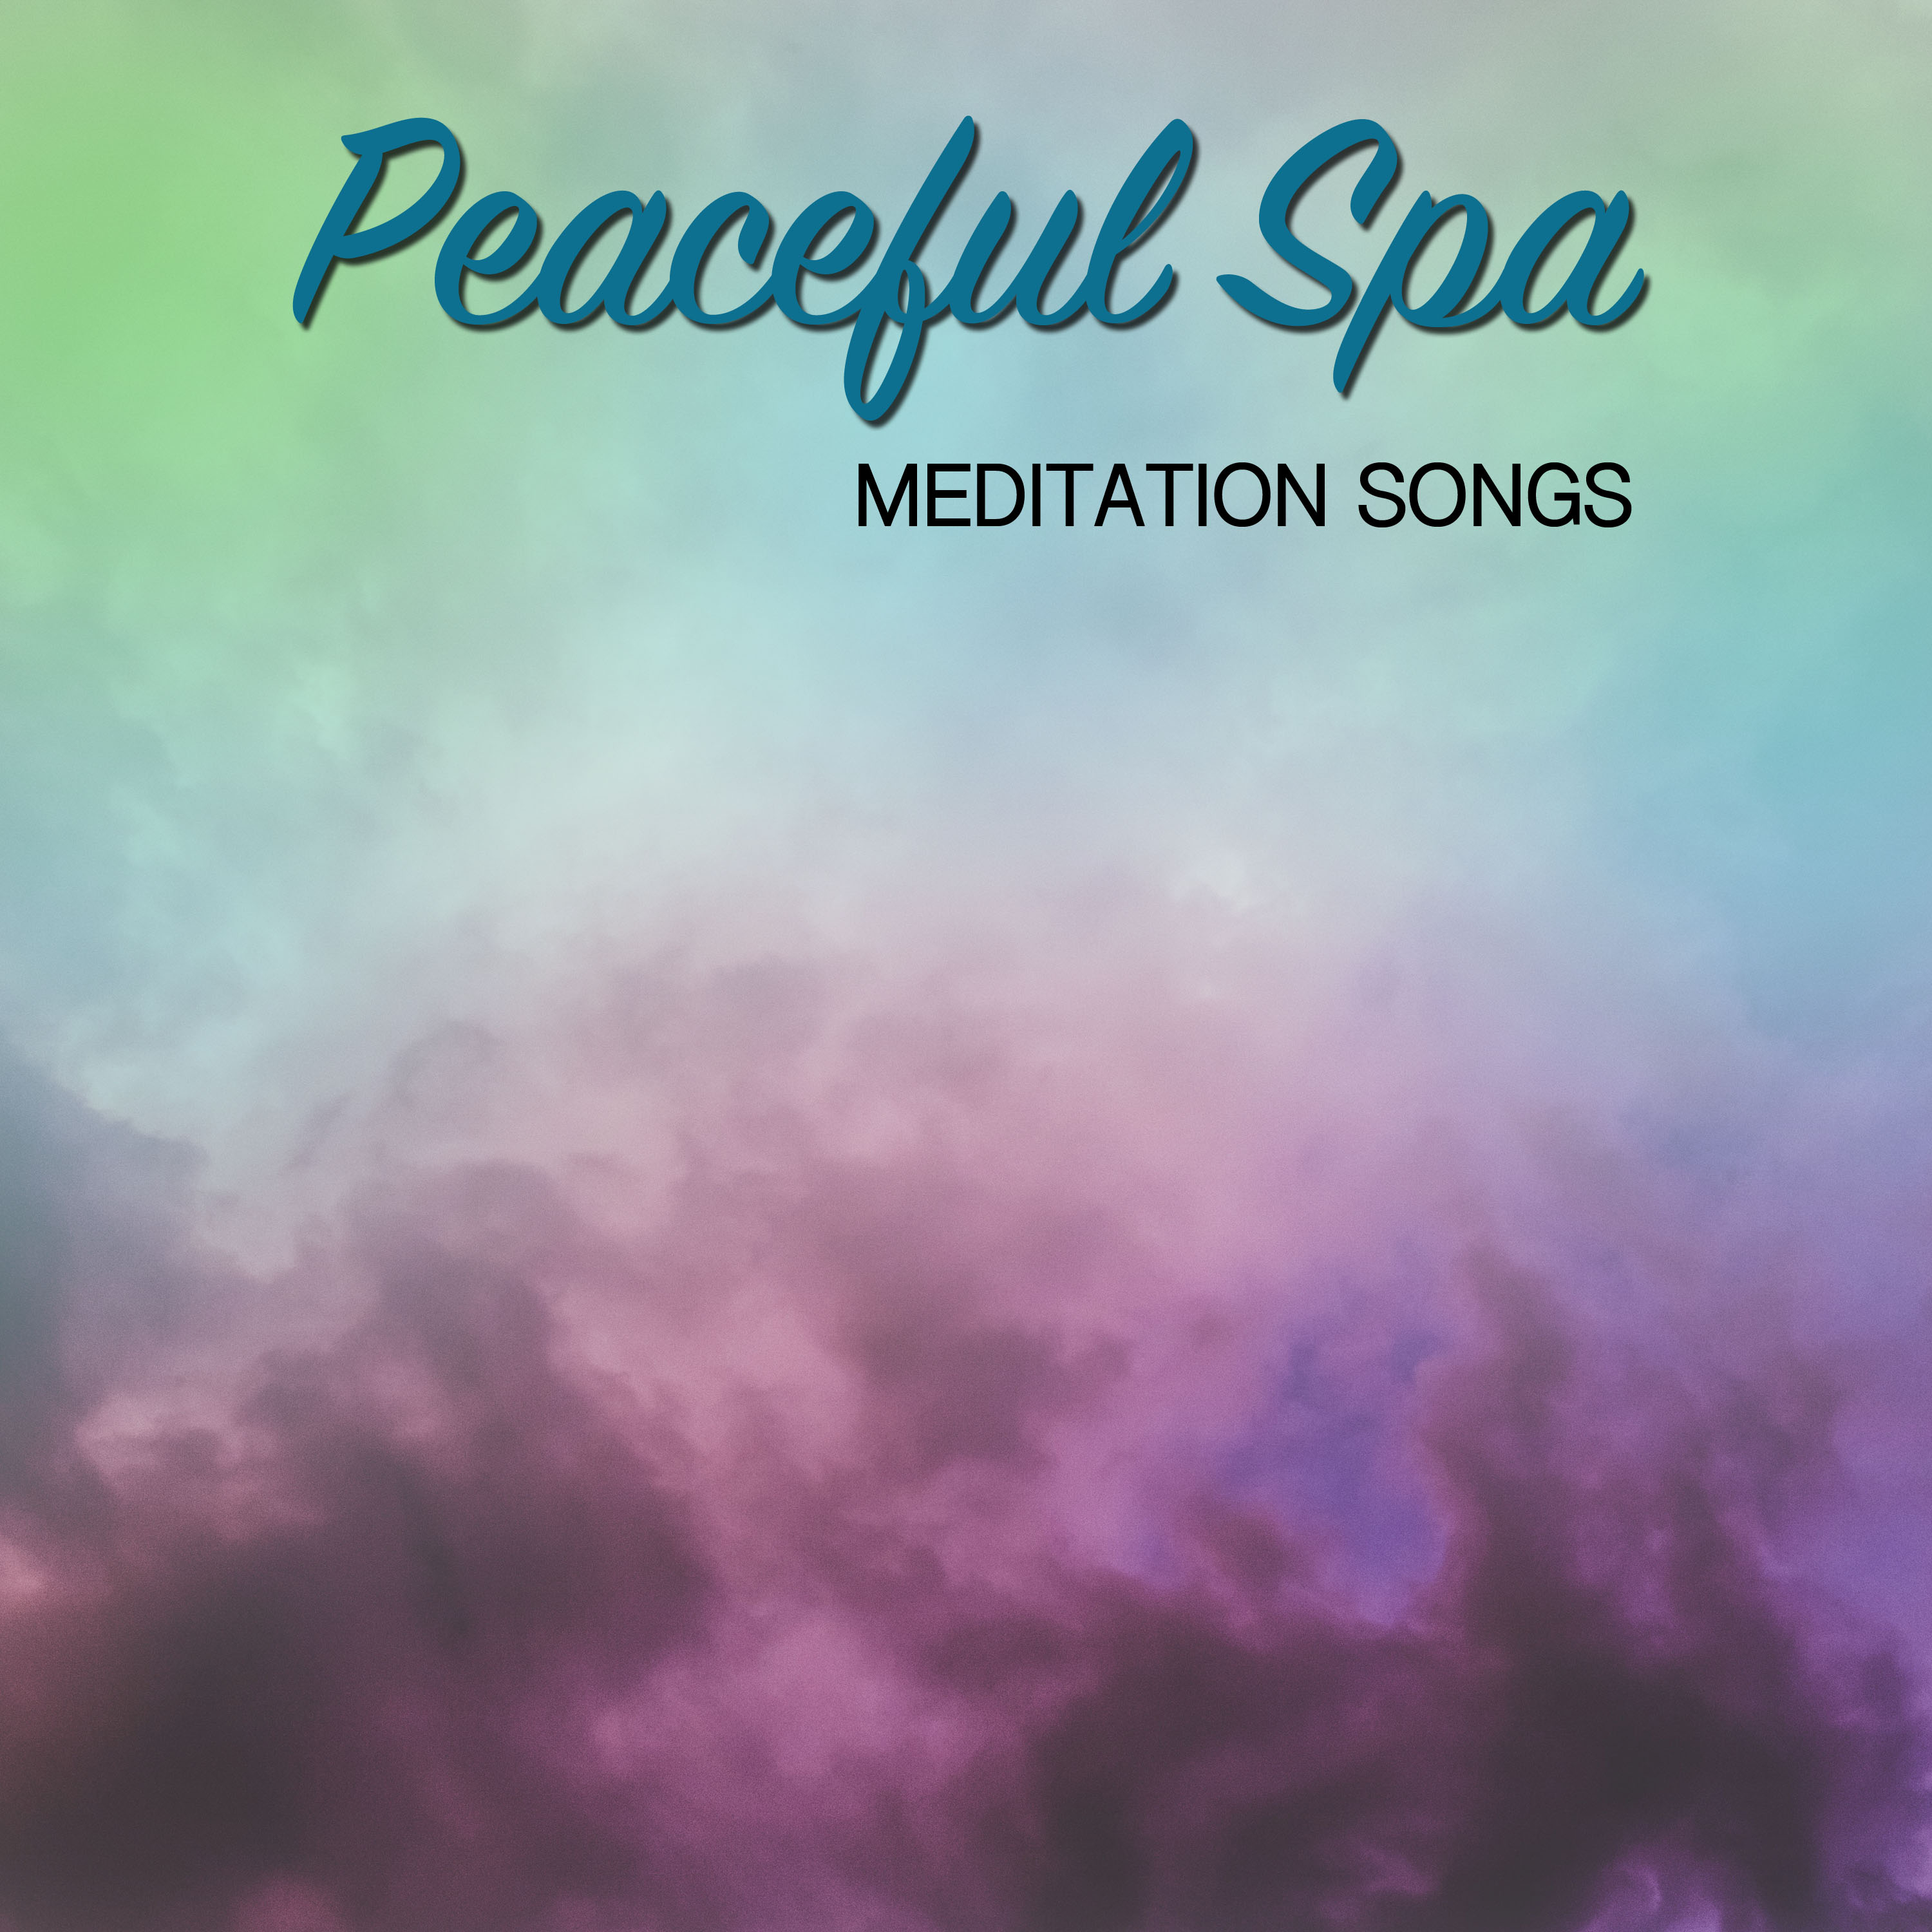 12 Peaceful Spa and Meditation Songs